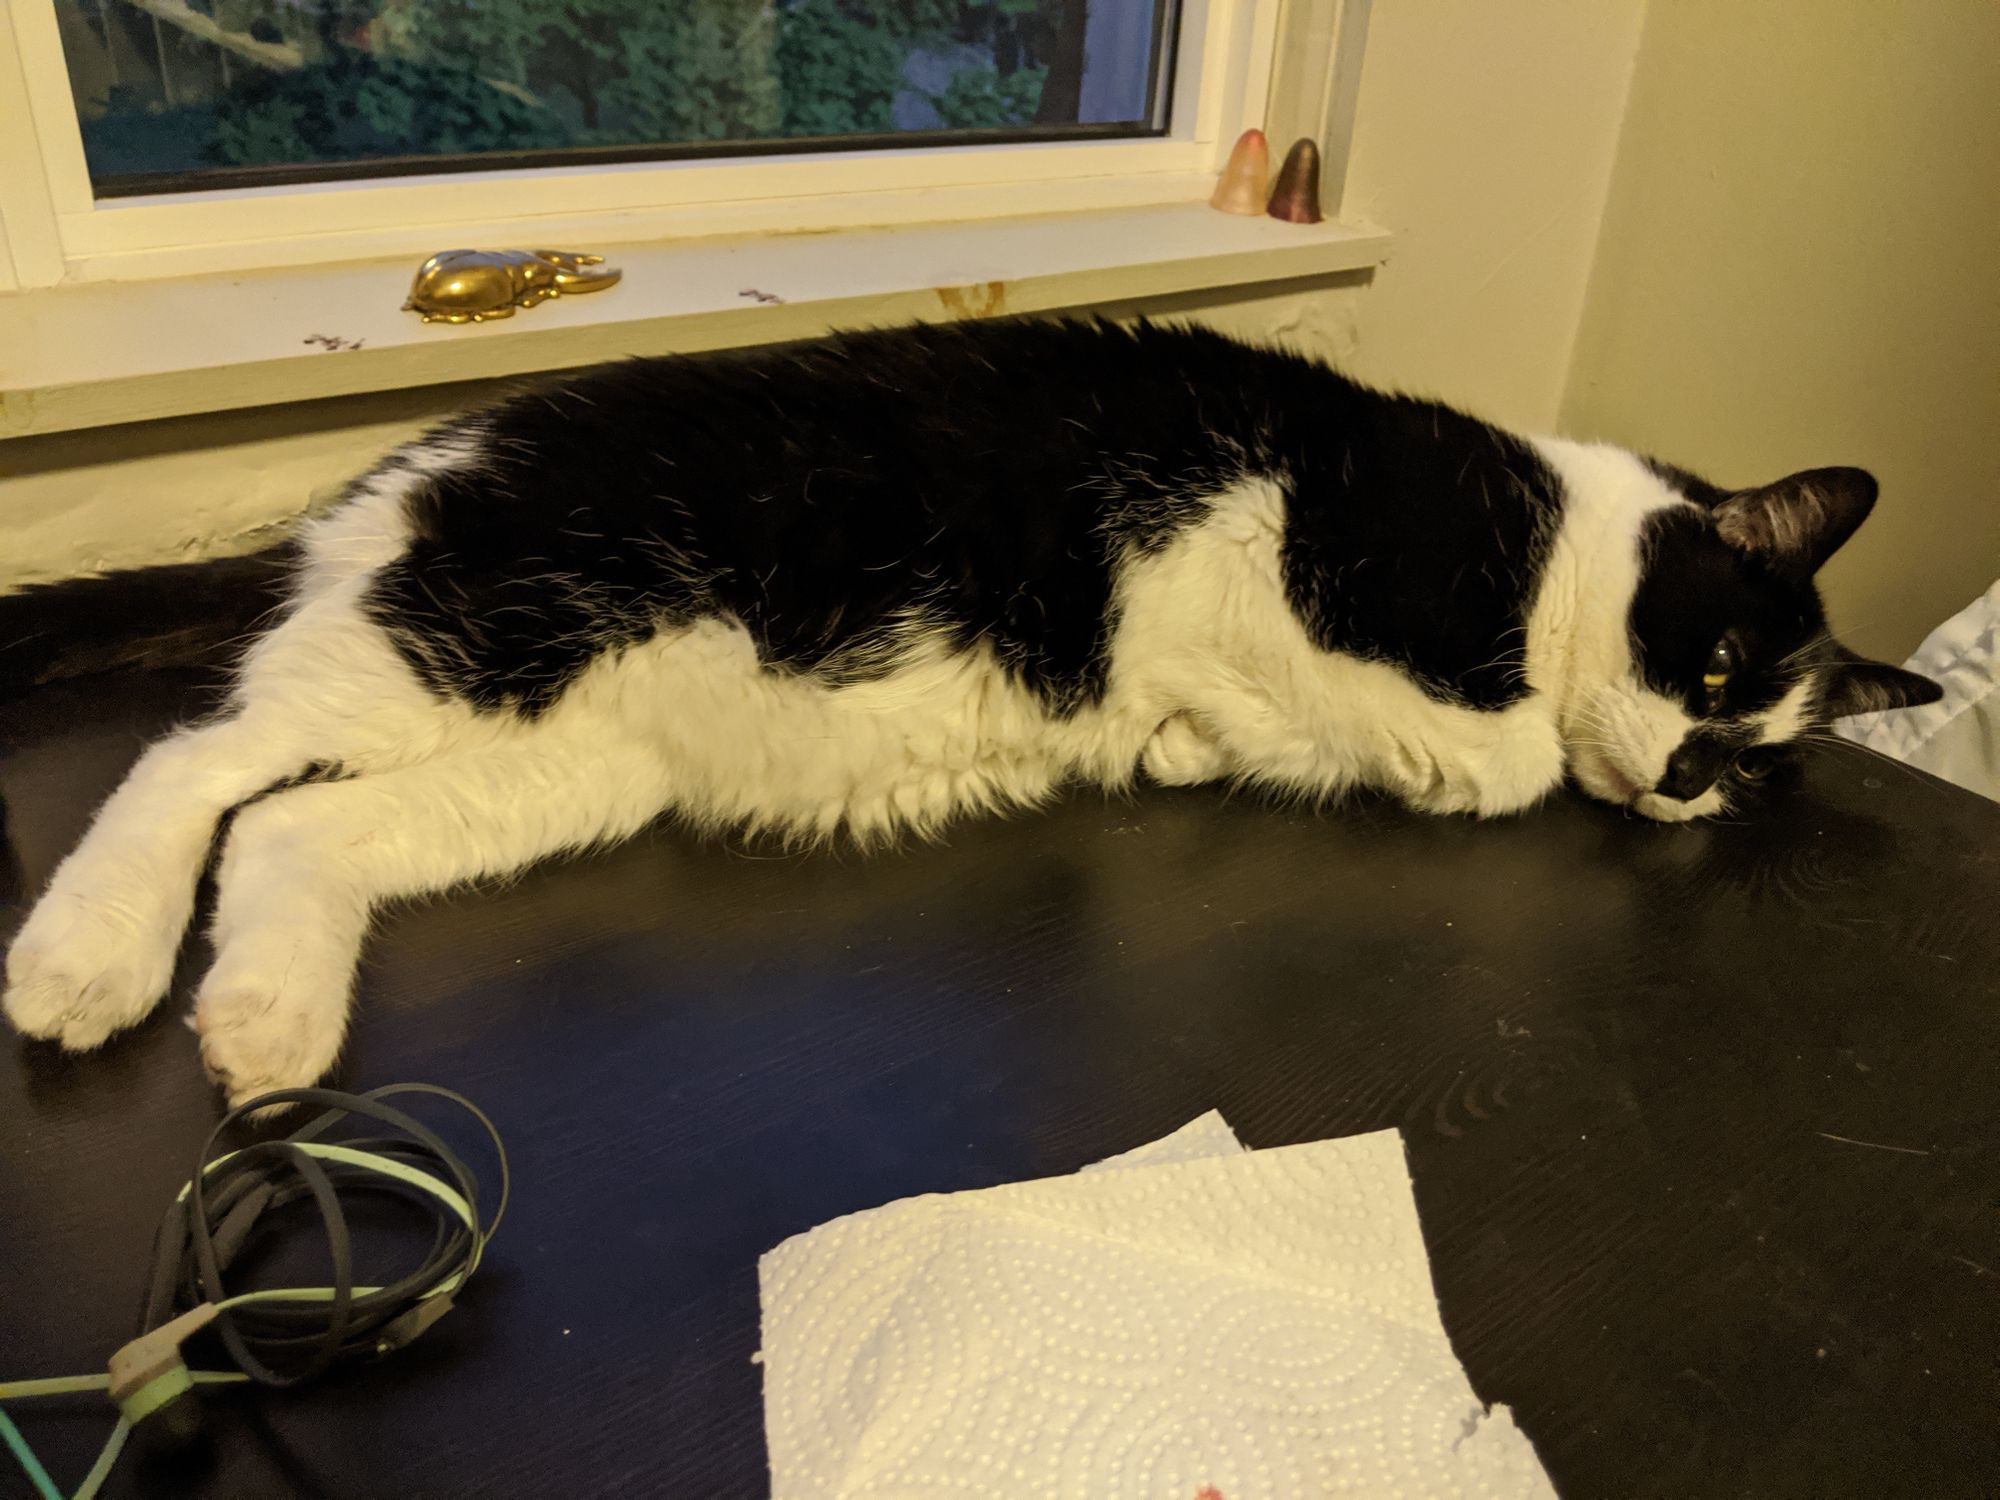 My black and white tuxedo cat Spicy, laying down with his arms tucked against his chest on the office table I'm sitting at.